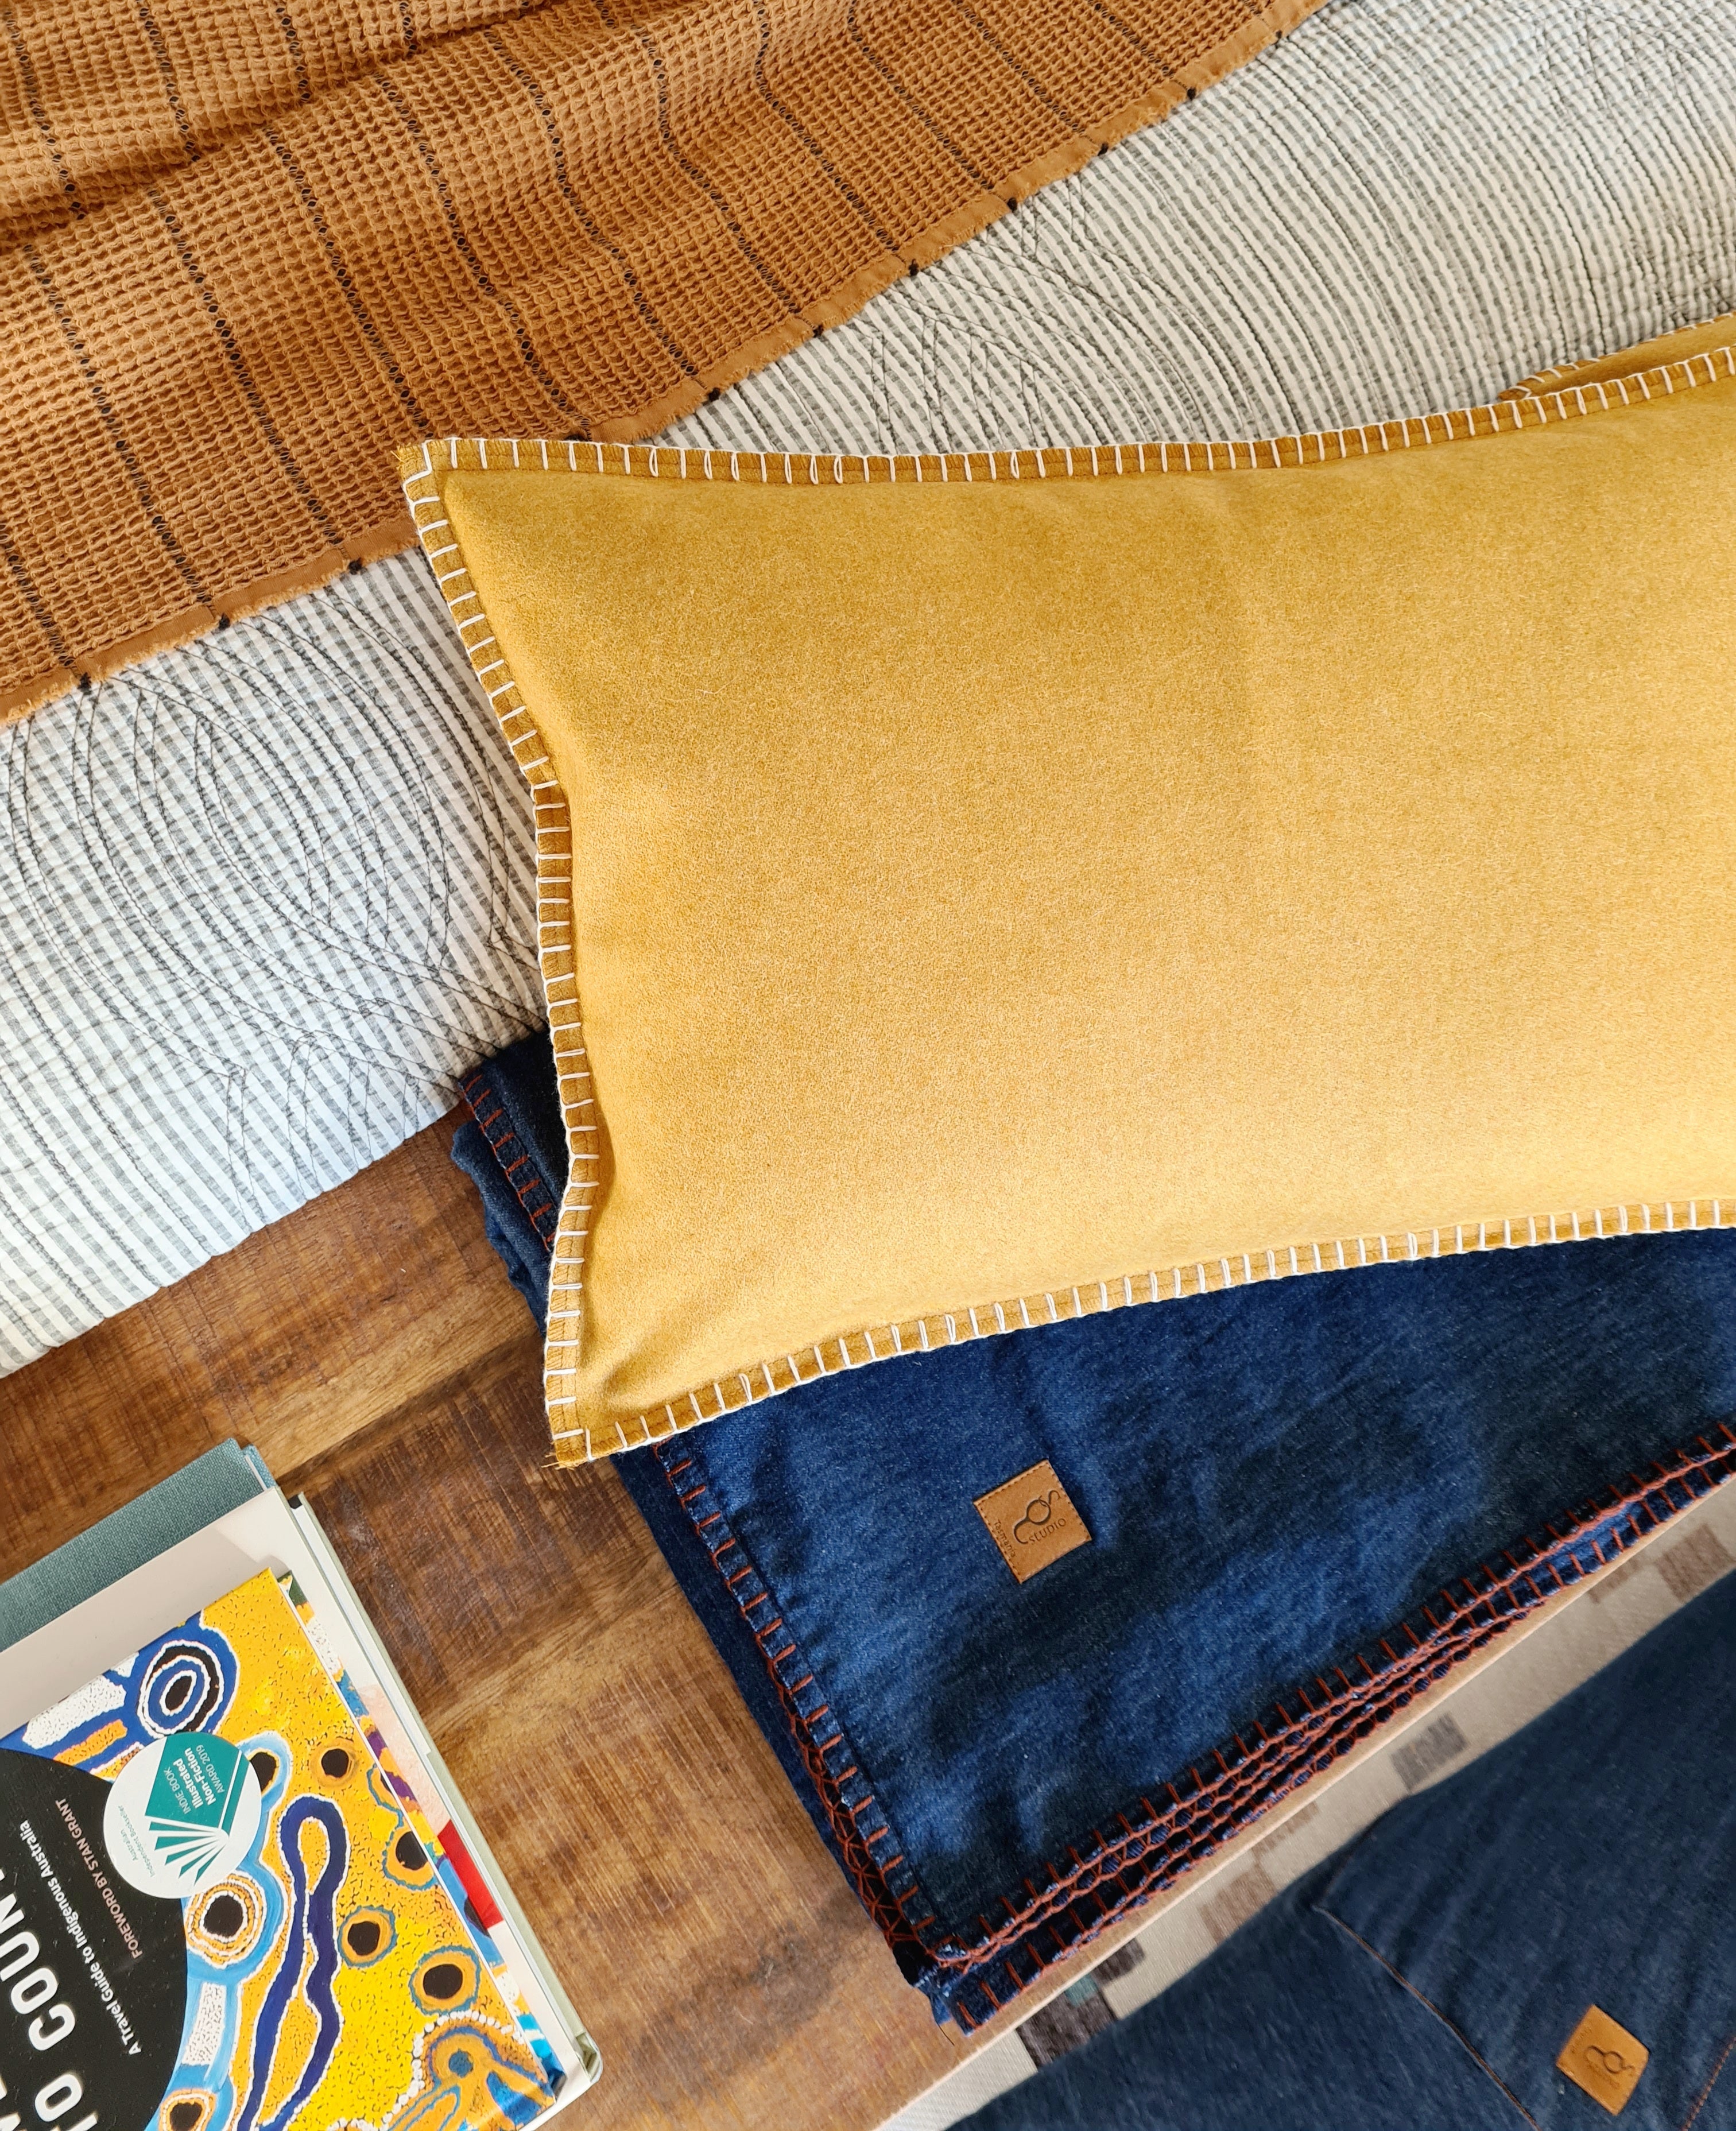 Mustard Organic Wool Felt Cushions Cushions The Spotted Quoll Studio 35 x 55cm Mustard with Natural Stitch 